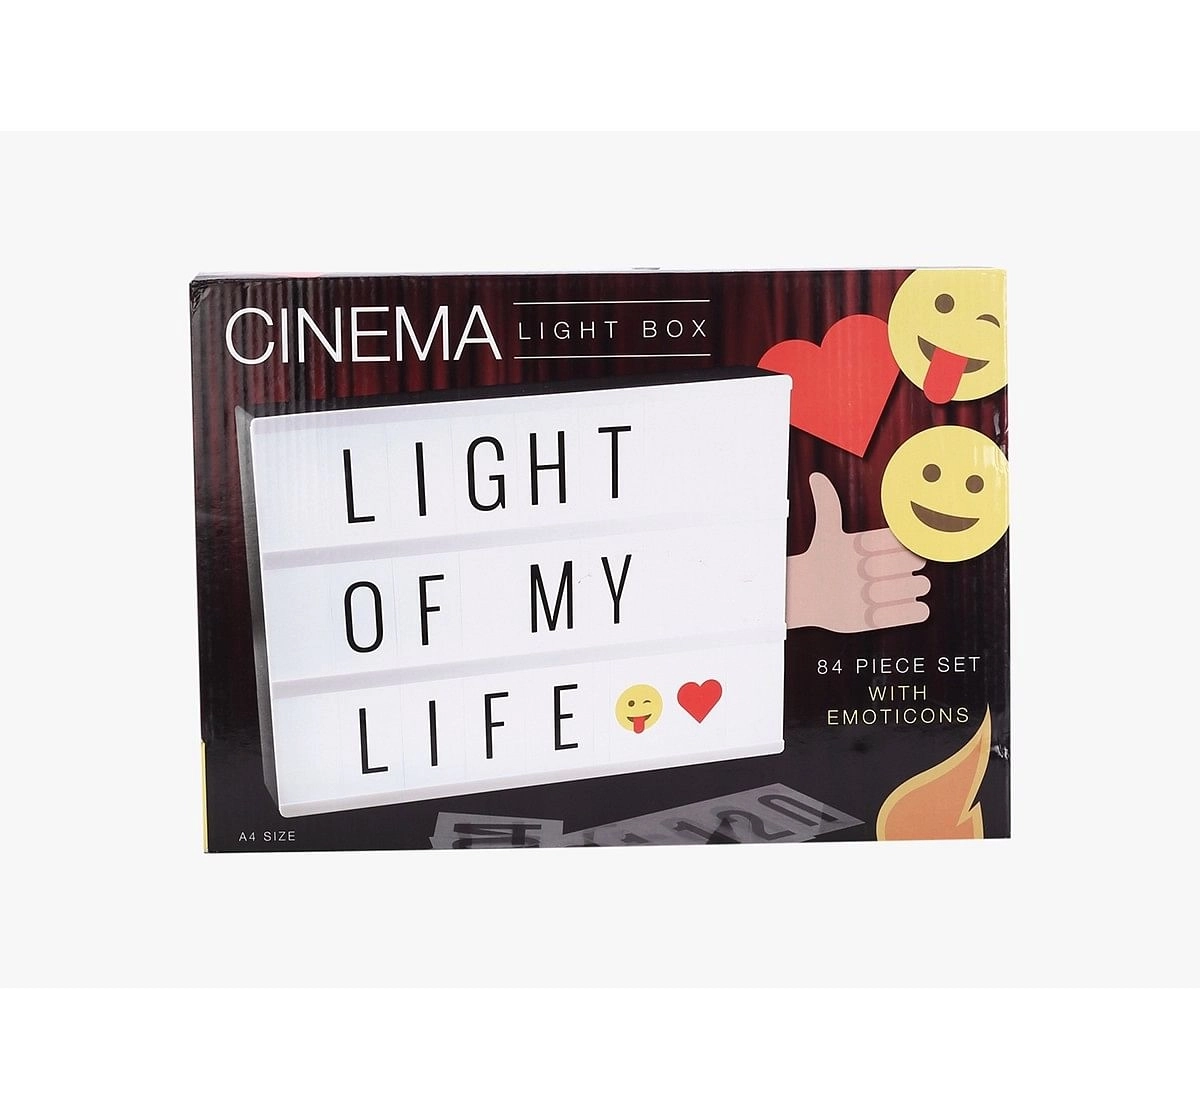  Red5 Cinema Light Box -Electronics Accessories for Kids age 3Y+ (White)